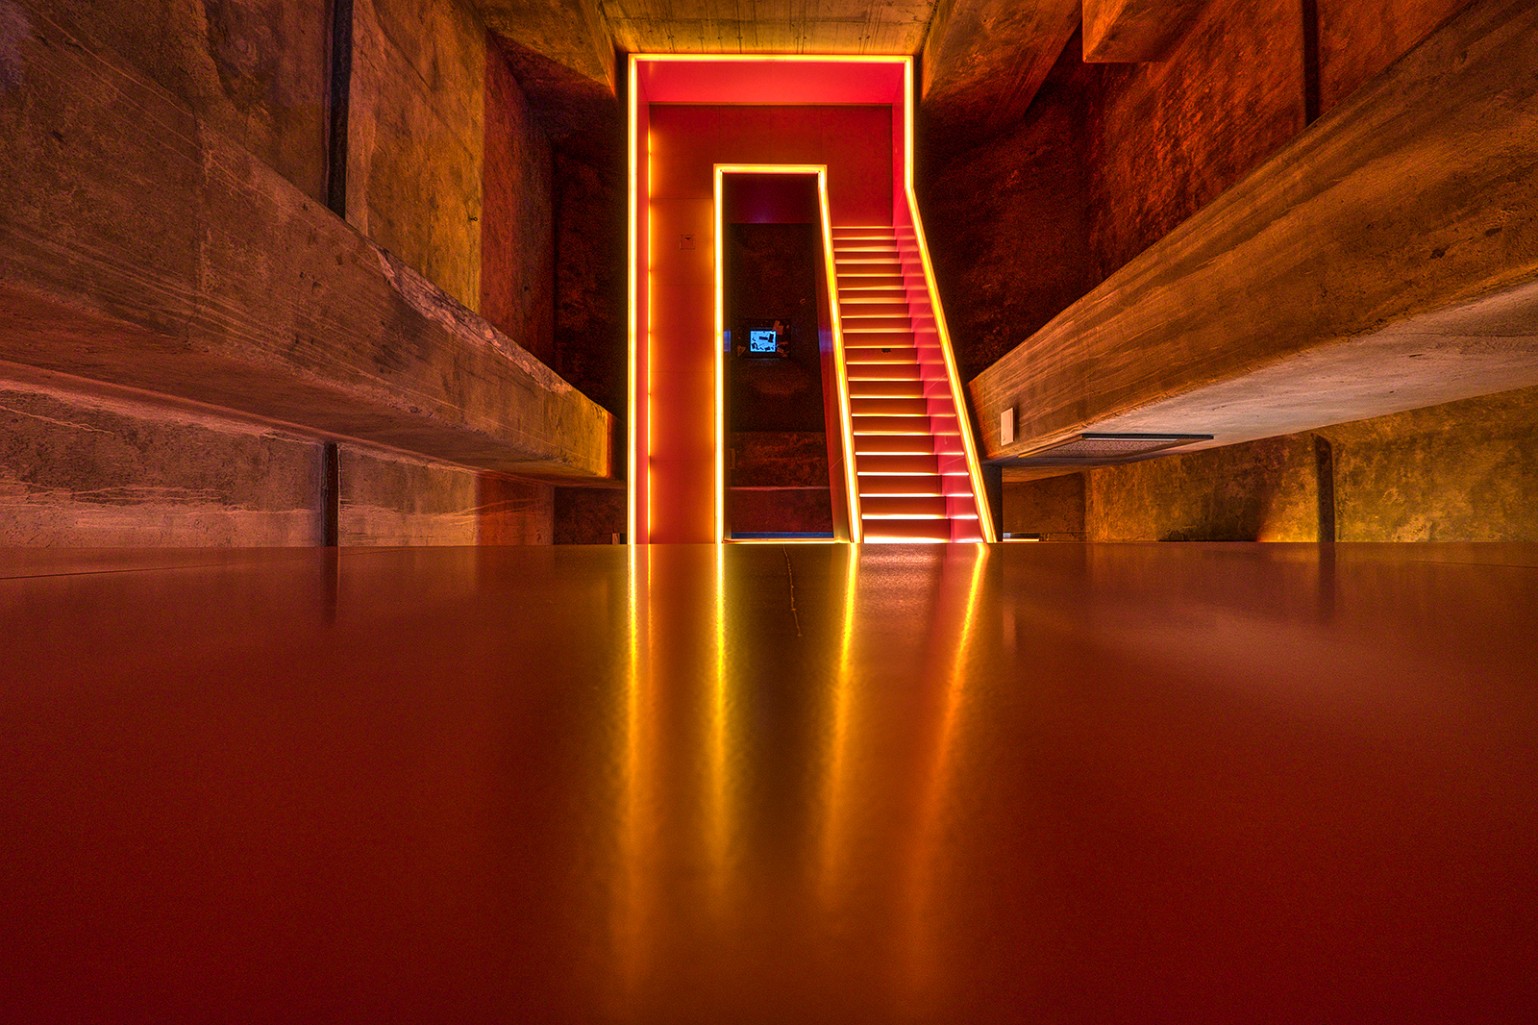 3735_Zollverein-Tagl_X-T1_10mm_7,1_ISO800And2more_HDR_PhM5_web